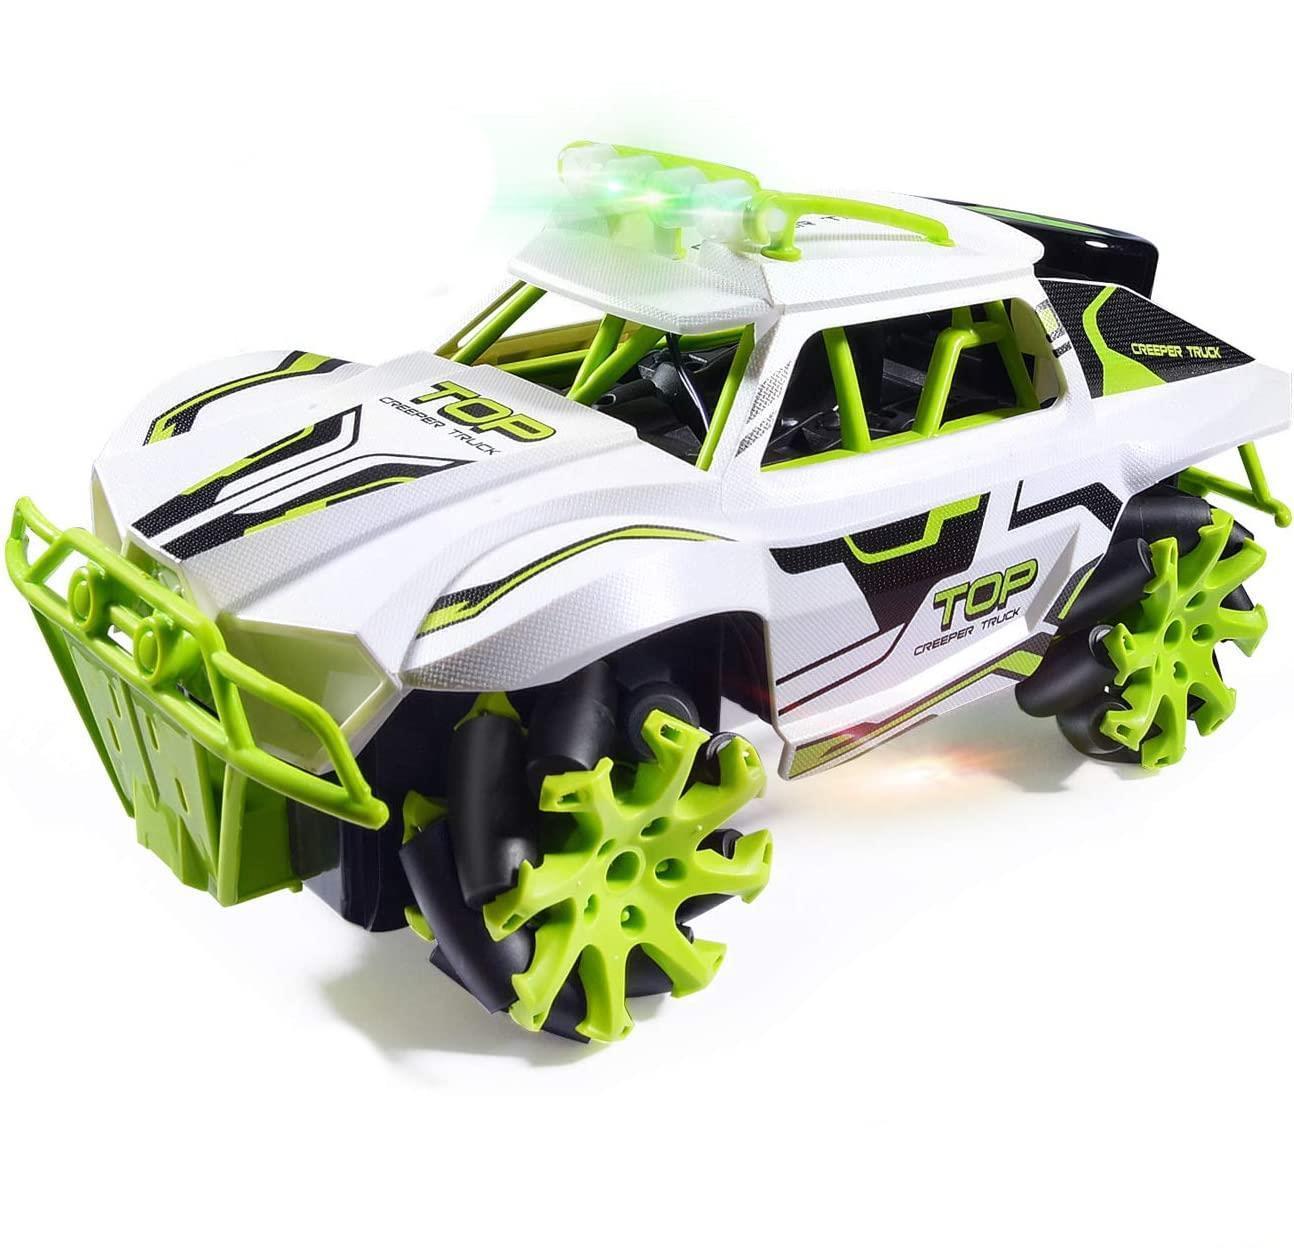 Speed Dual Mode Switch 4WD High Speed Drift Stunt Truck,All Terrains Electric Toy Off Road RC -green